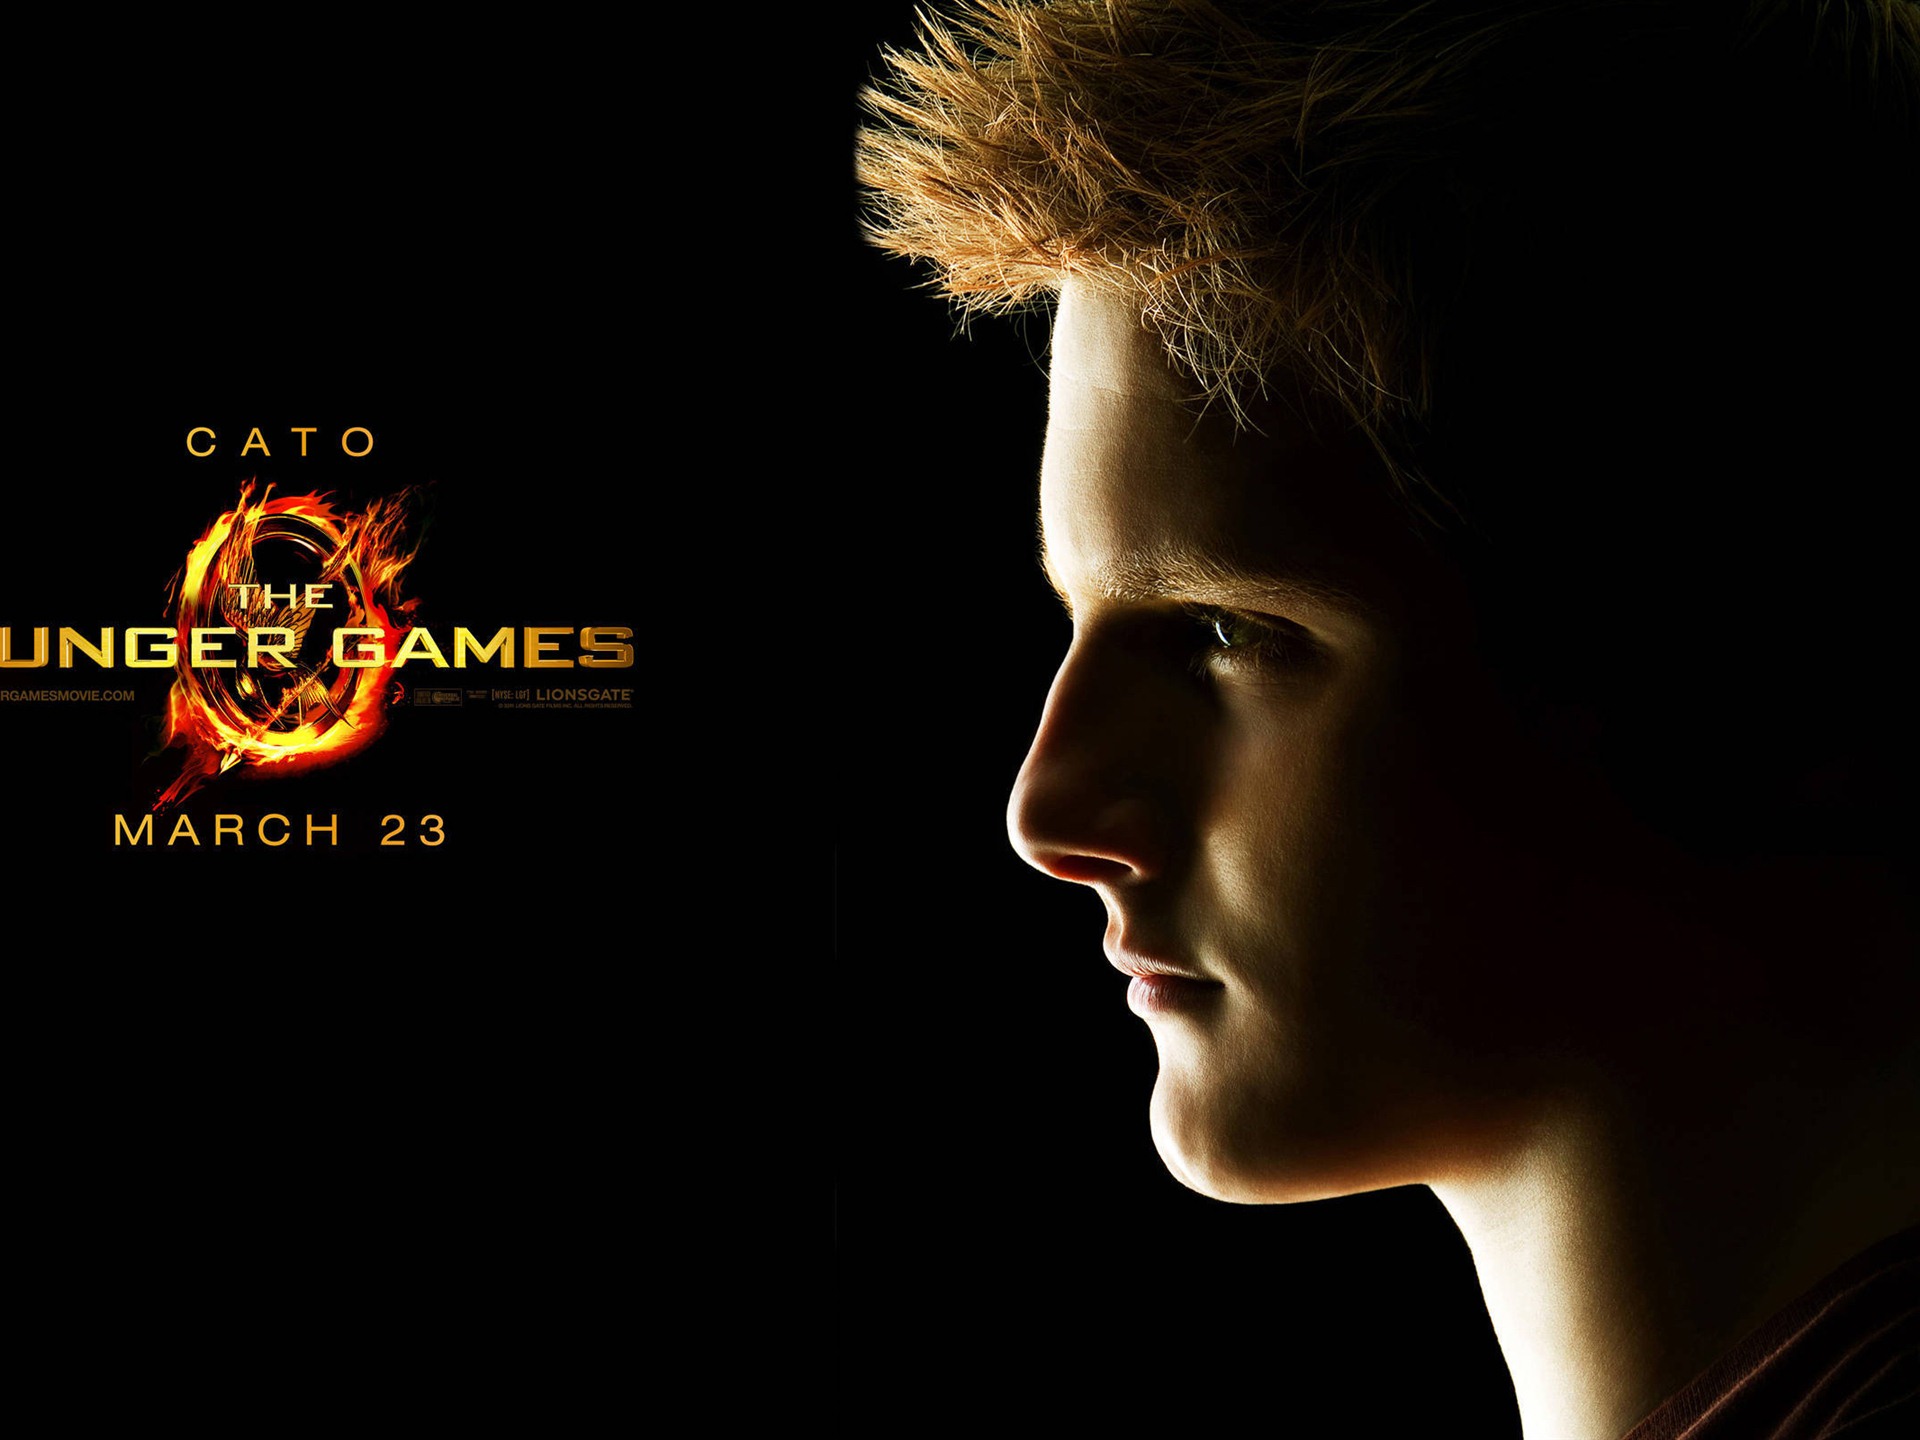 The Hunger Games HD wallpapers #3 - 1920x1440